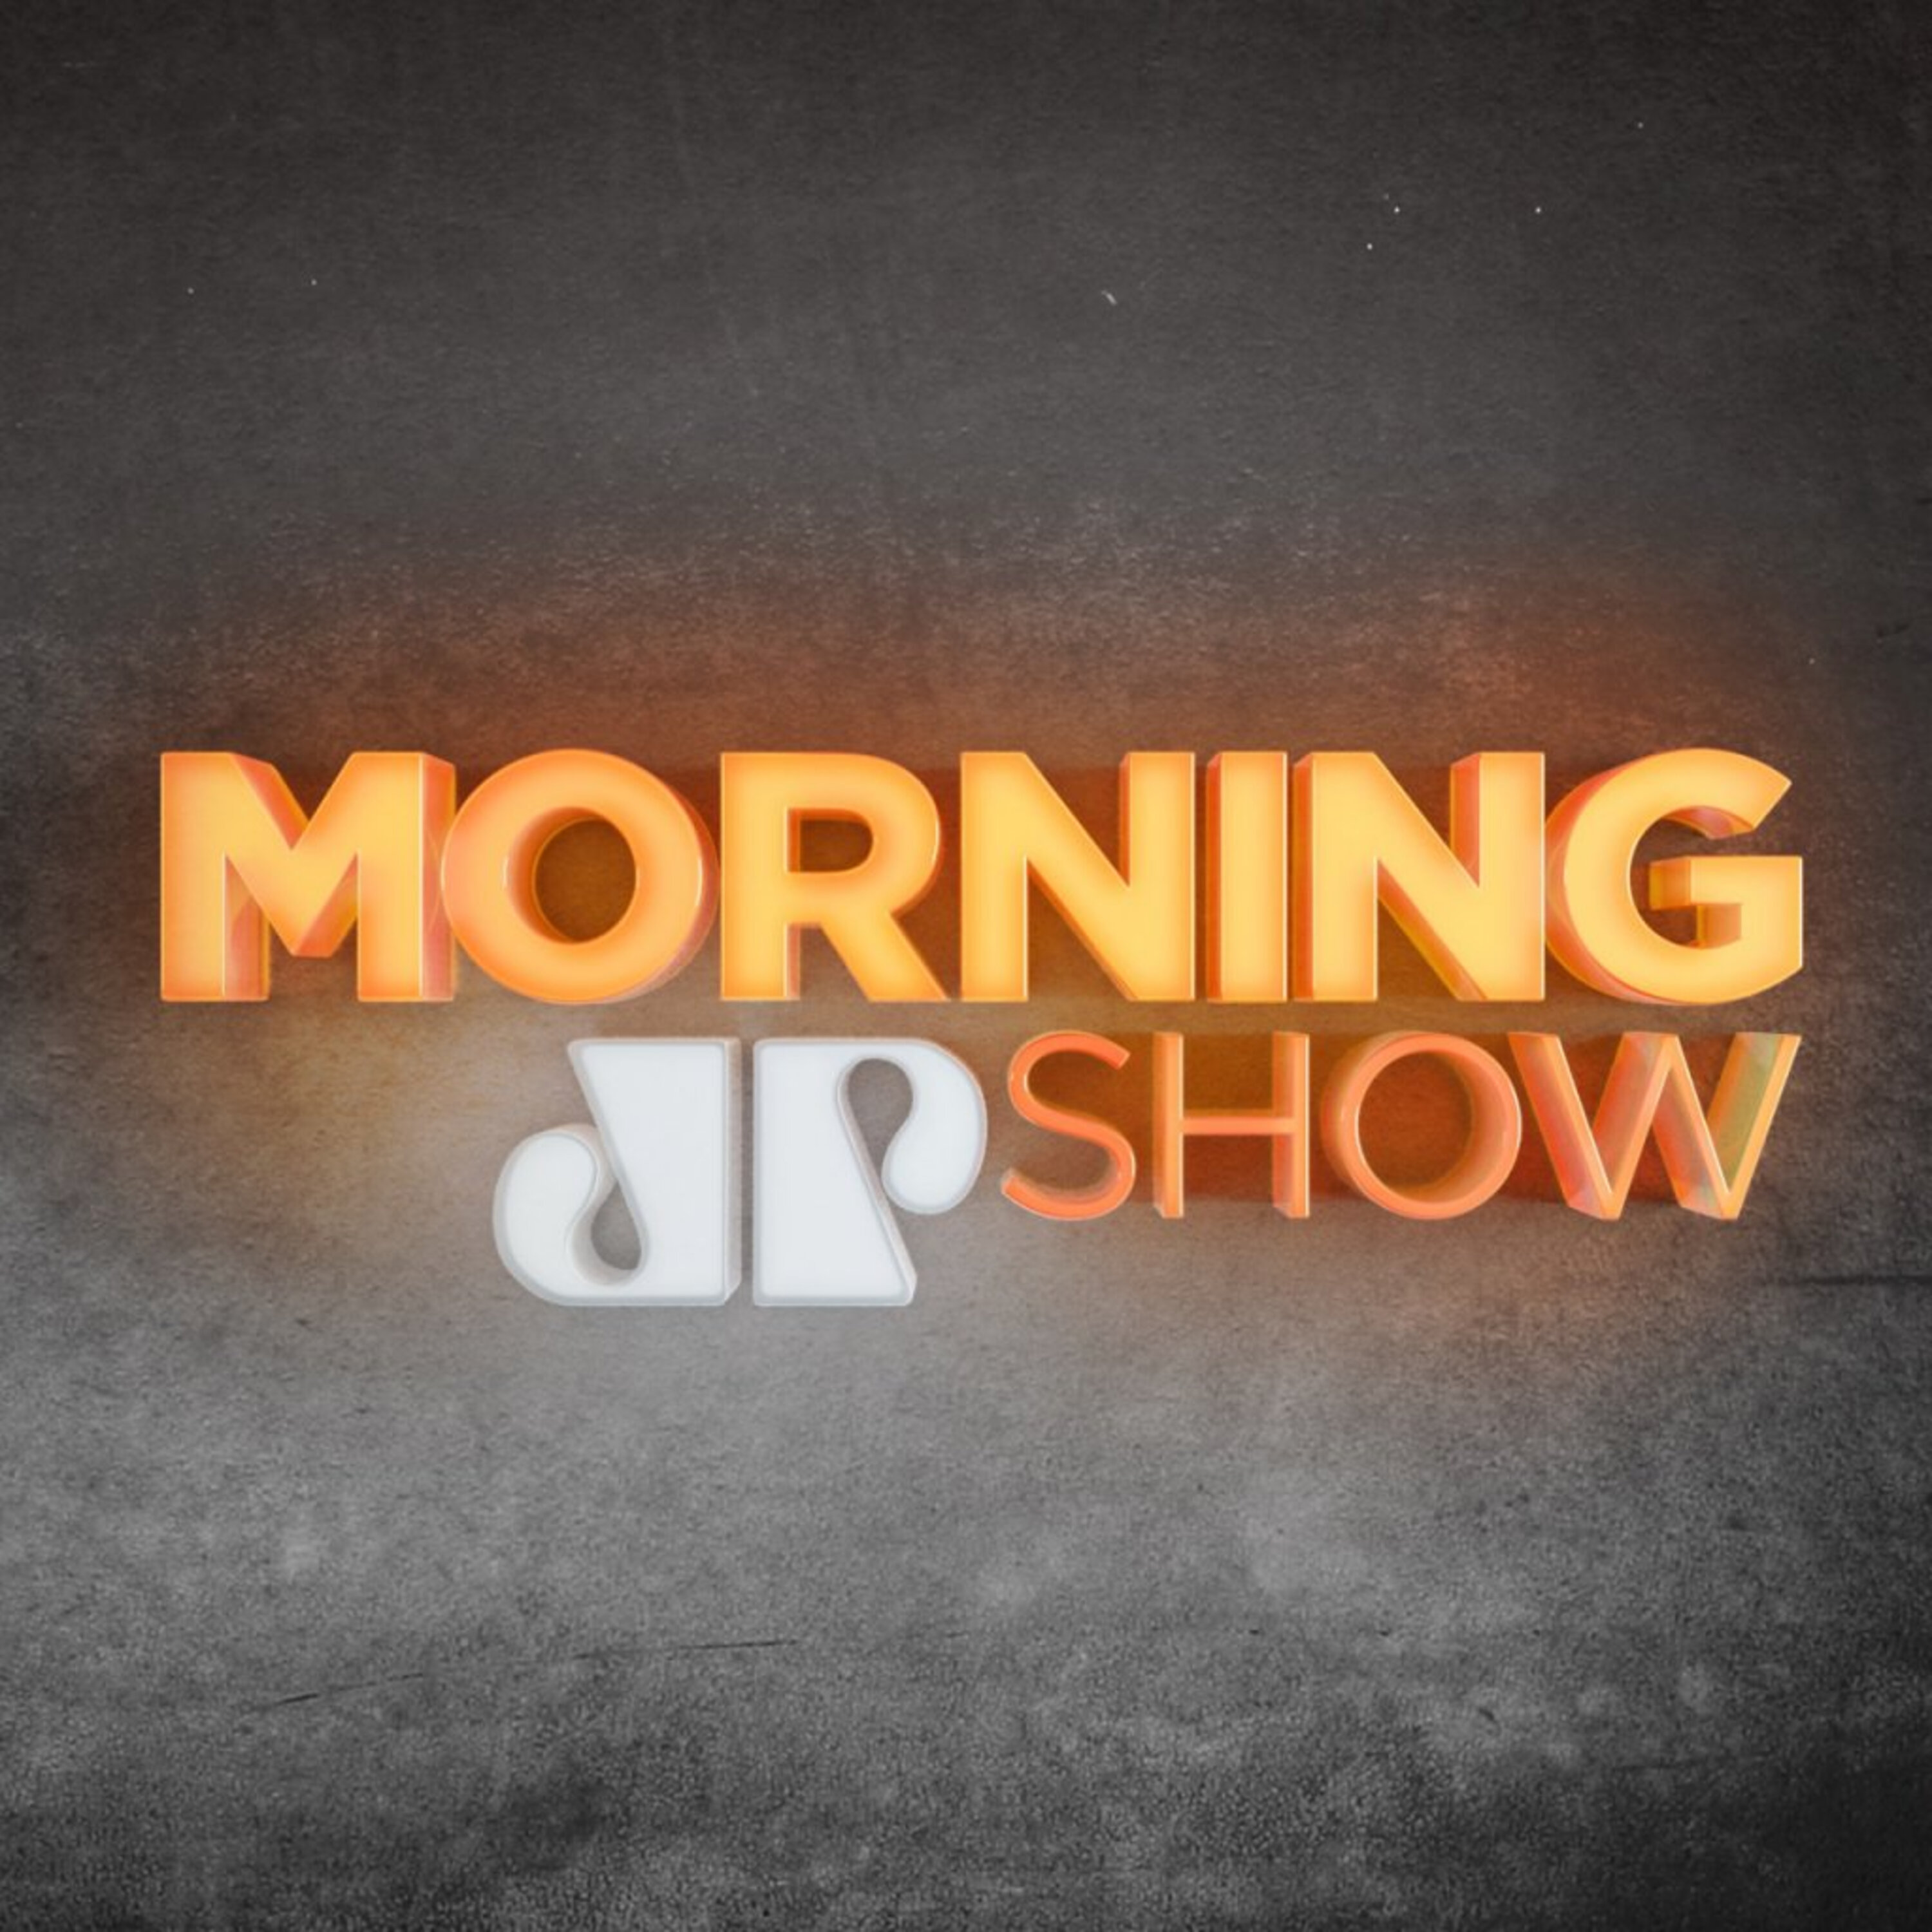 MORNING SHOW - 31/12/2021